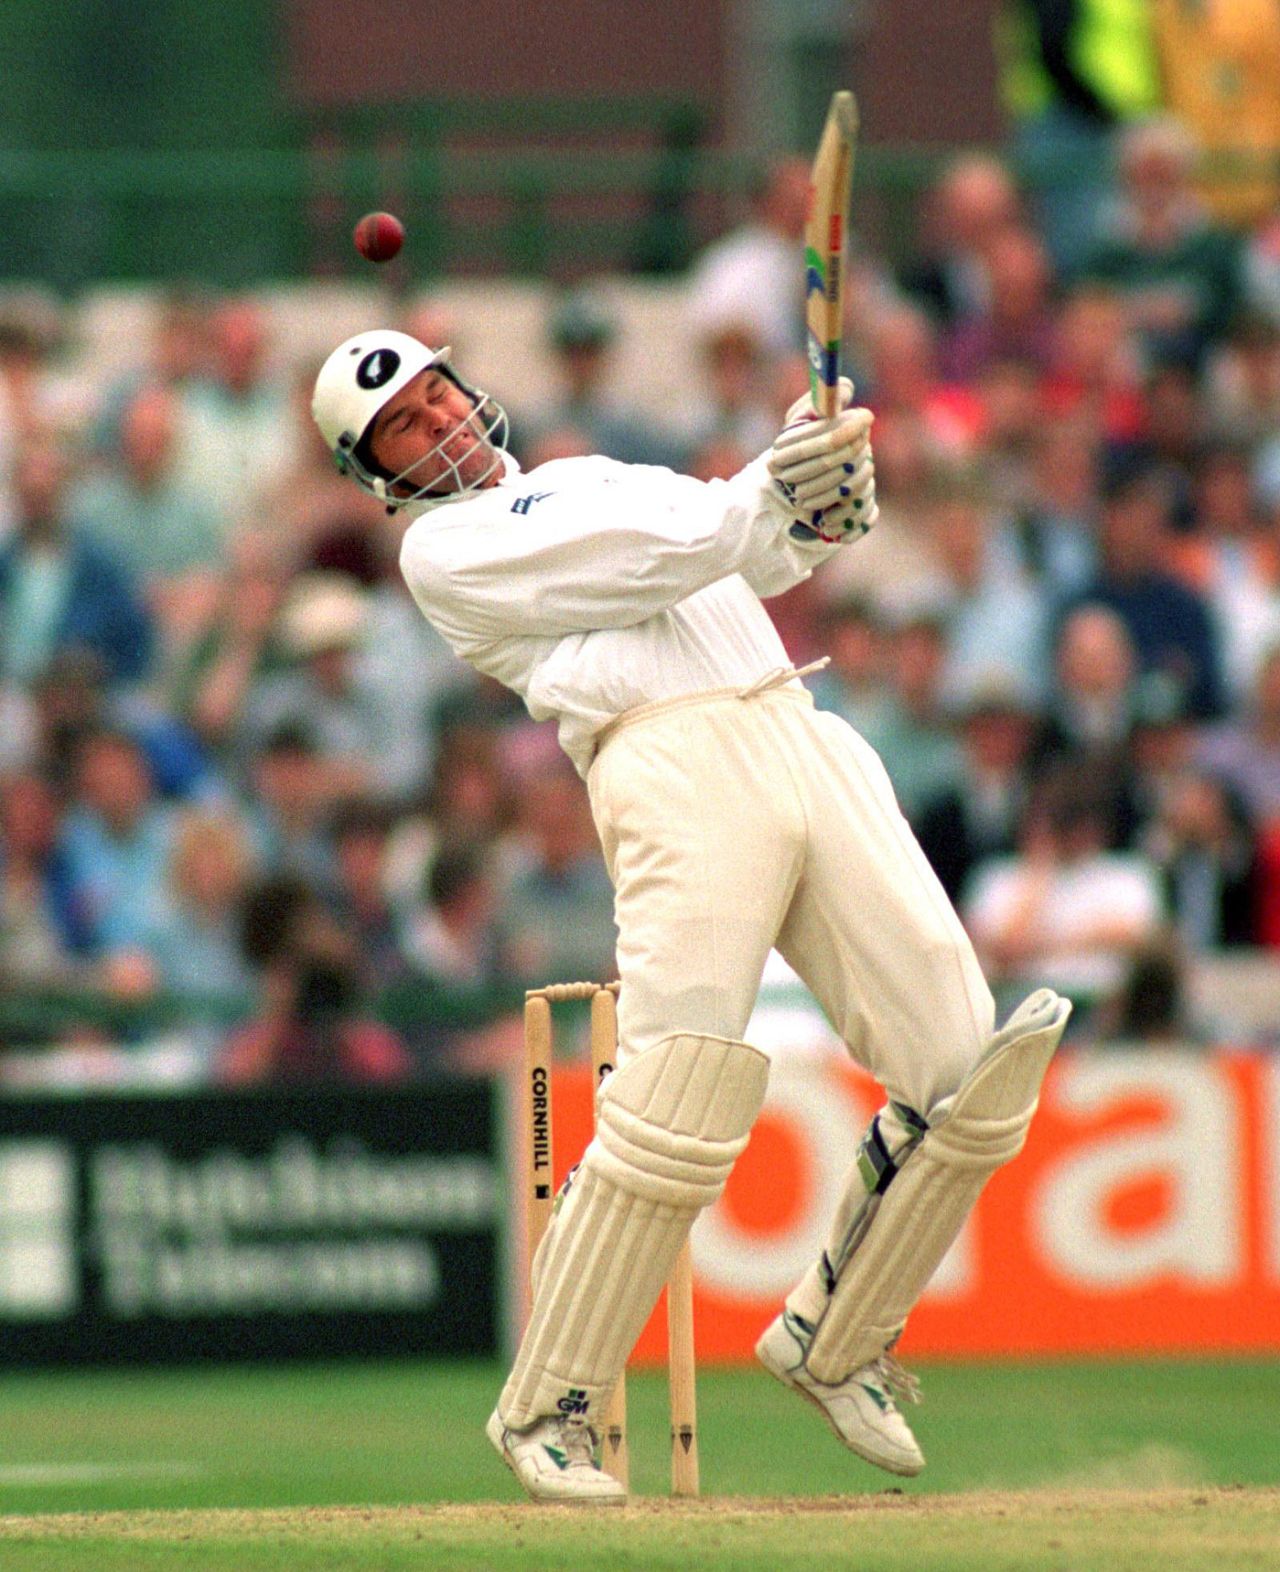 Martin Crowe sways away from a bouncer, England v New Zealand, 3rd Test, Old Trafford, 1994